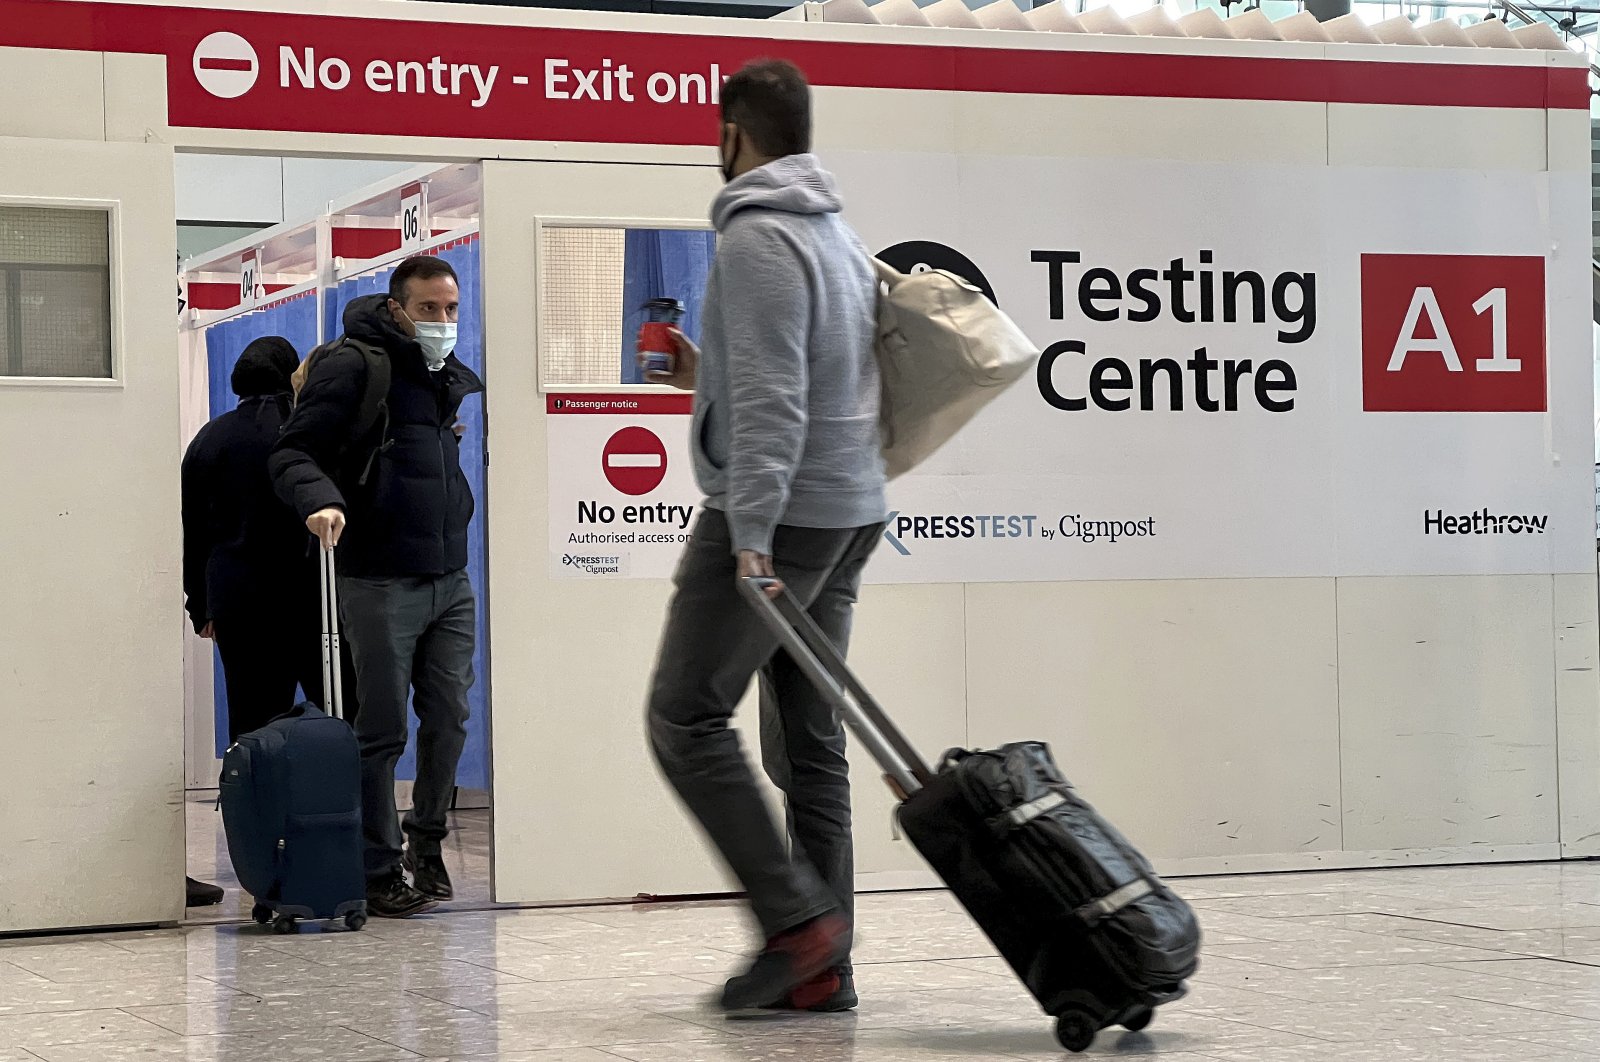 Passengers get a COVID-19 test at Heathrow Airport in London, UK, Nov. 29, 2021. (AP Photo)